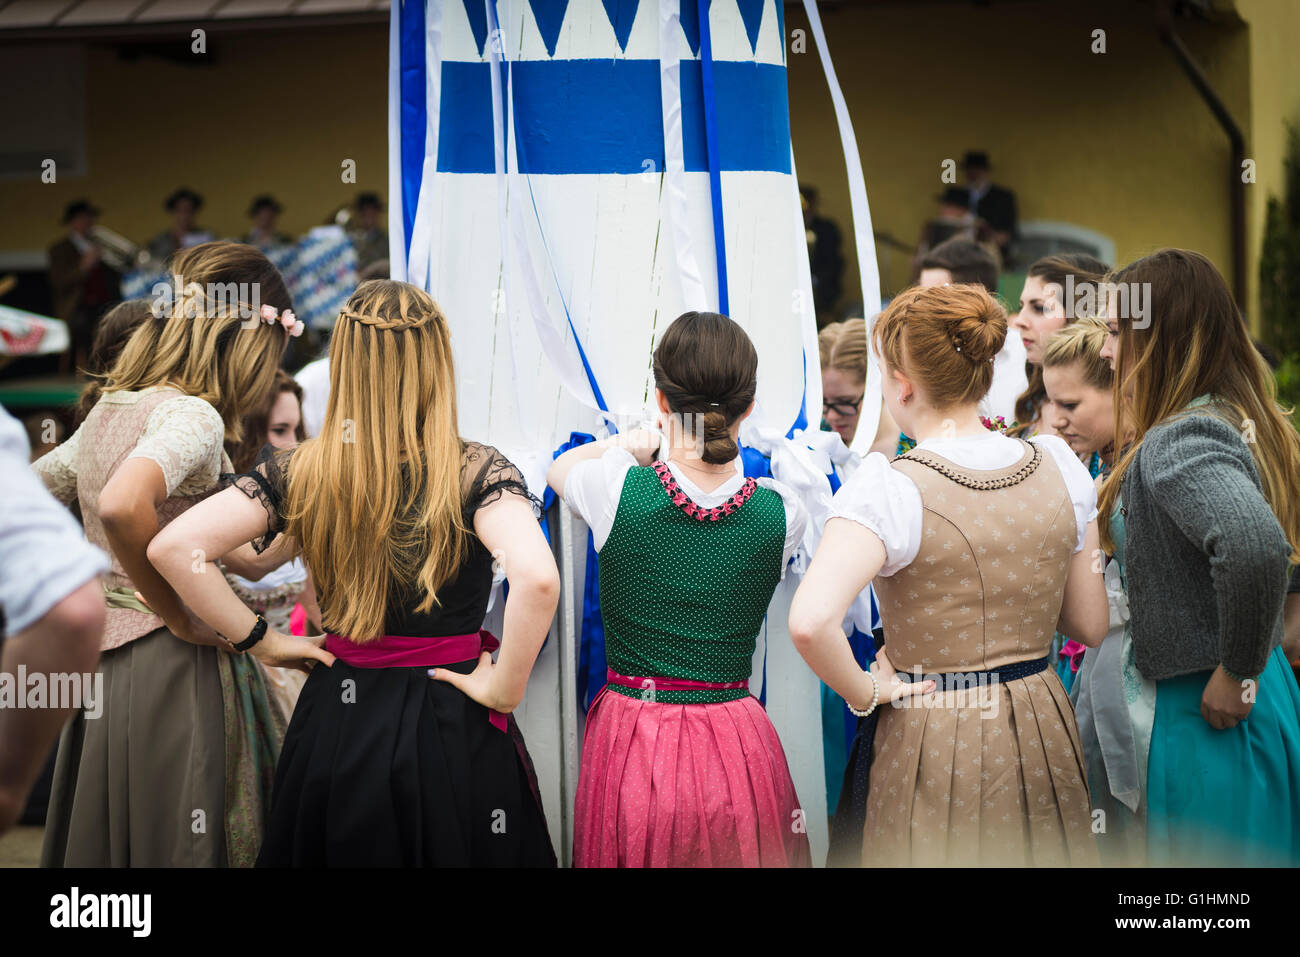 Women and men in local costumes dancing a traditional bavarian folk dance  knotting blue and white ribbons to the maypole Stock Photo